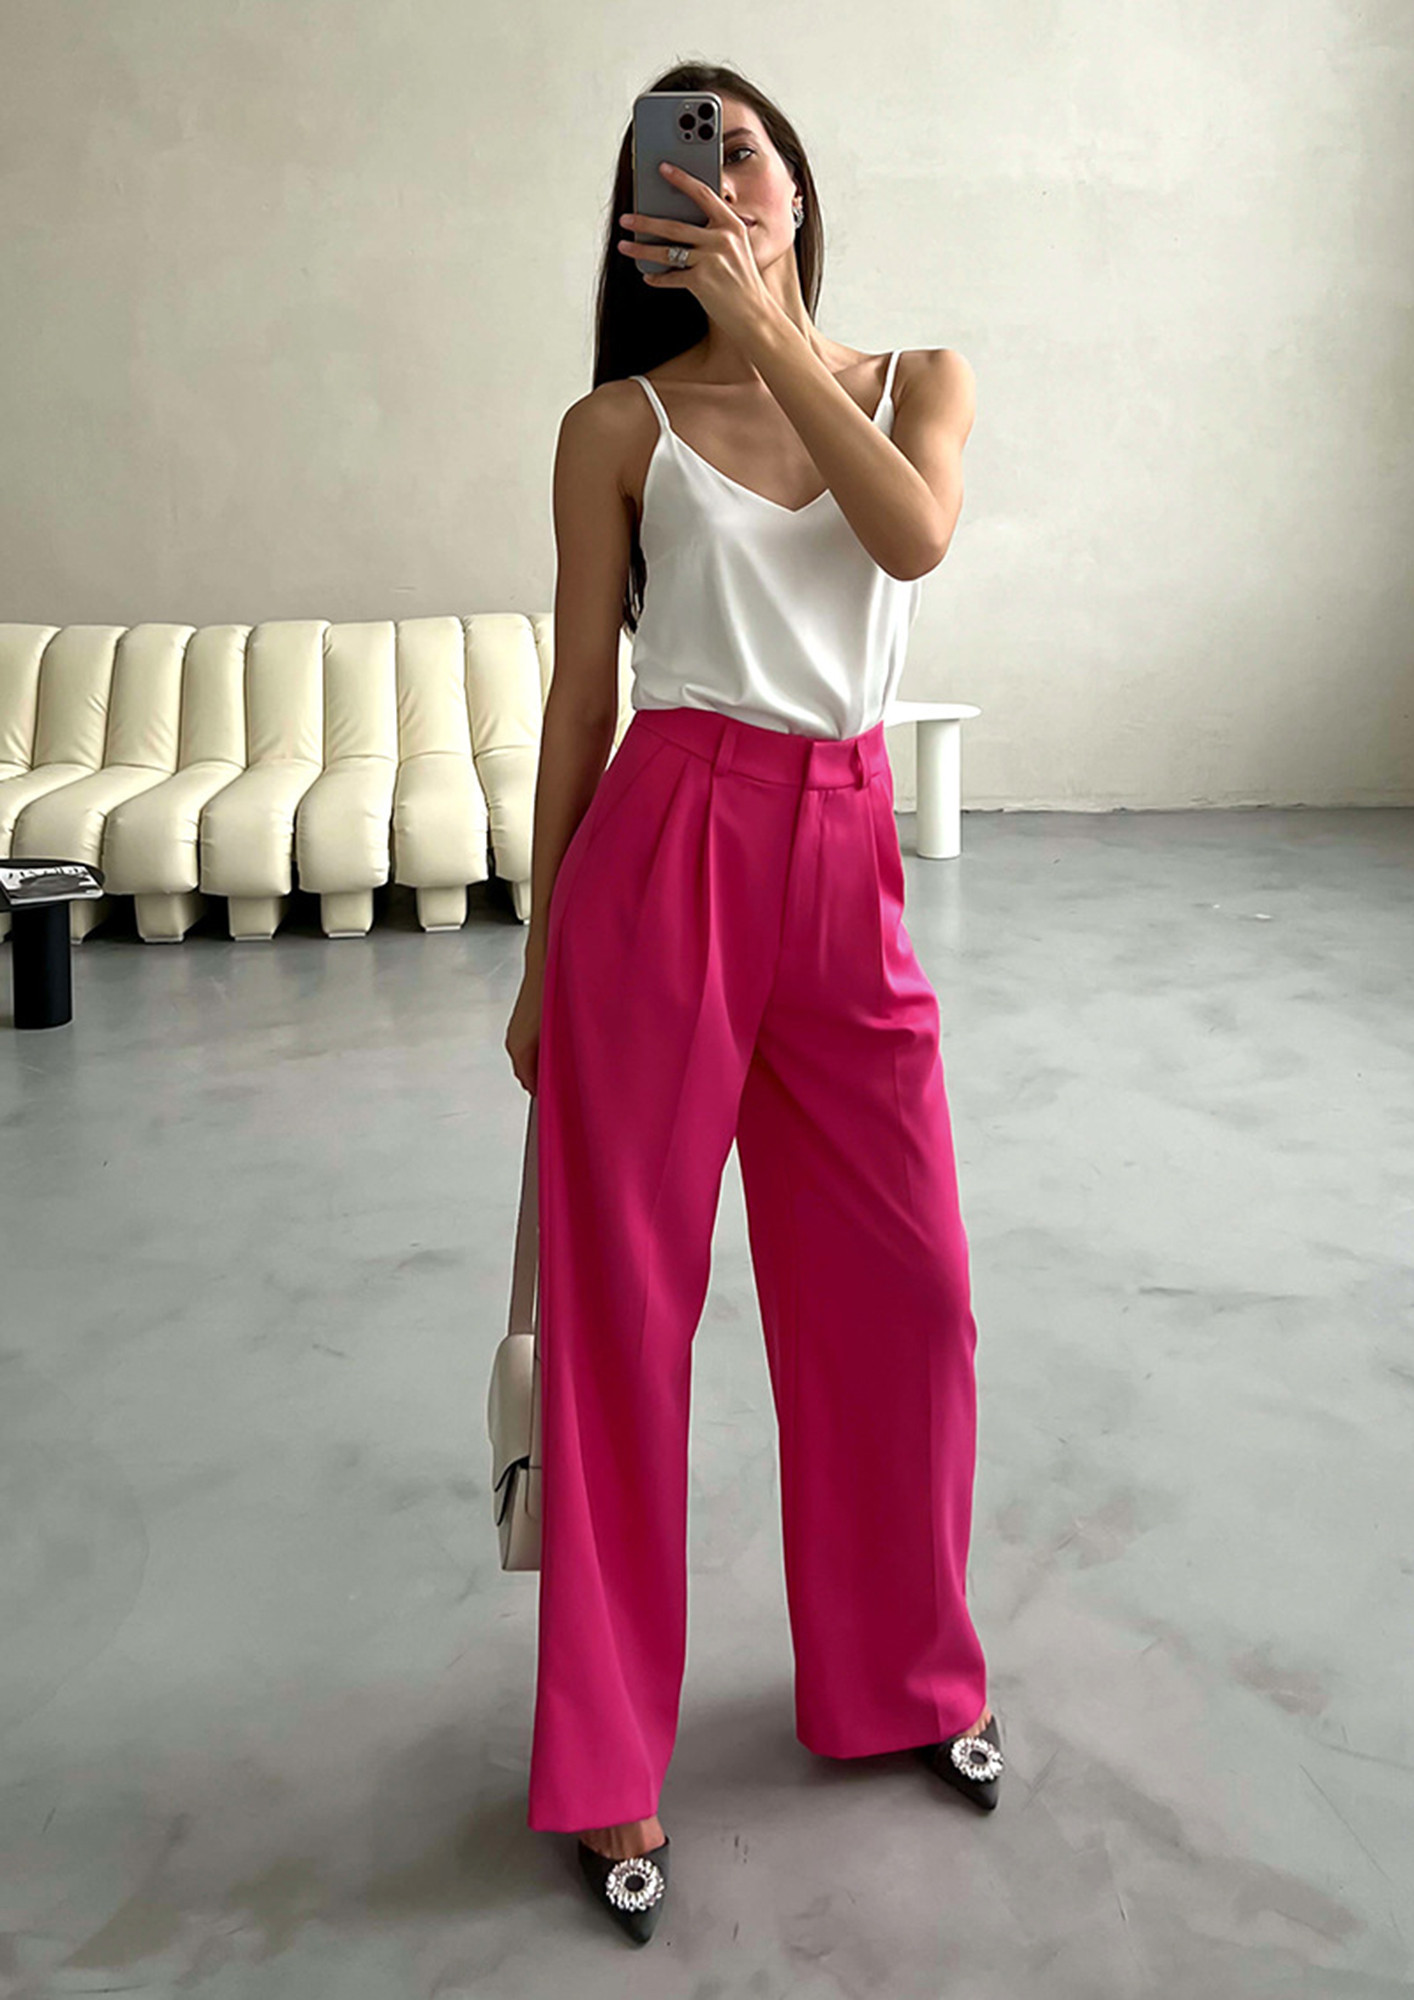 Hot Pink Woven Pants - Wide Pant Legs - High-Waisted Pants - Lulus